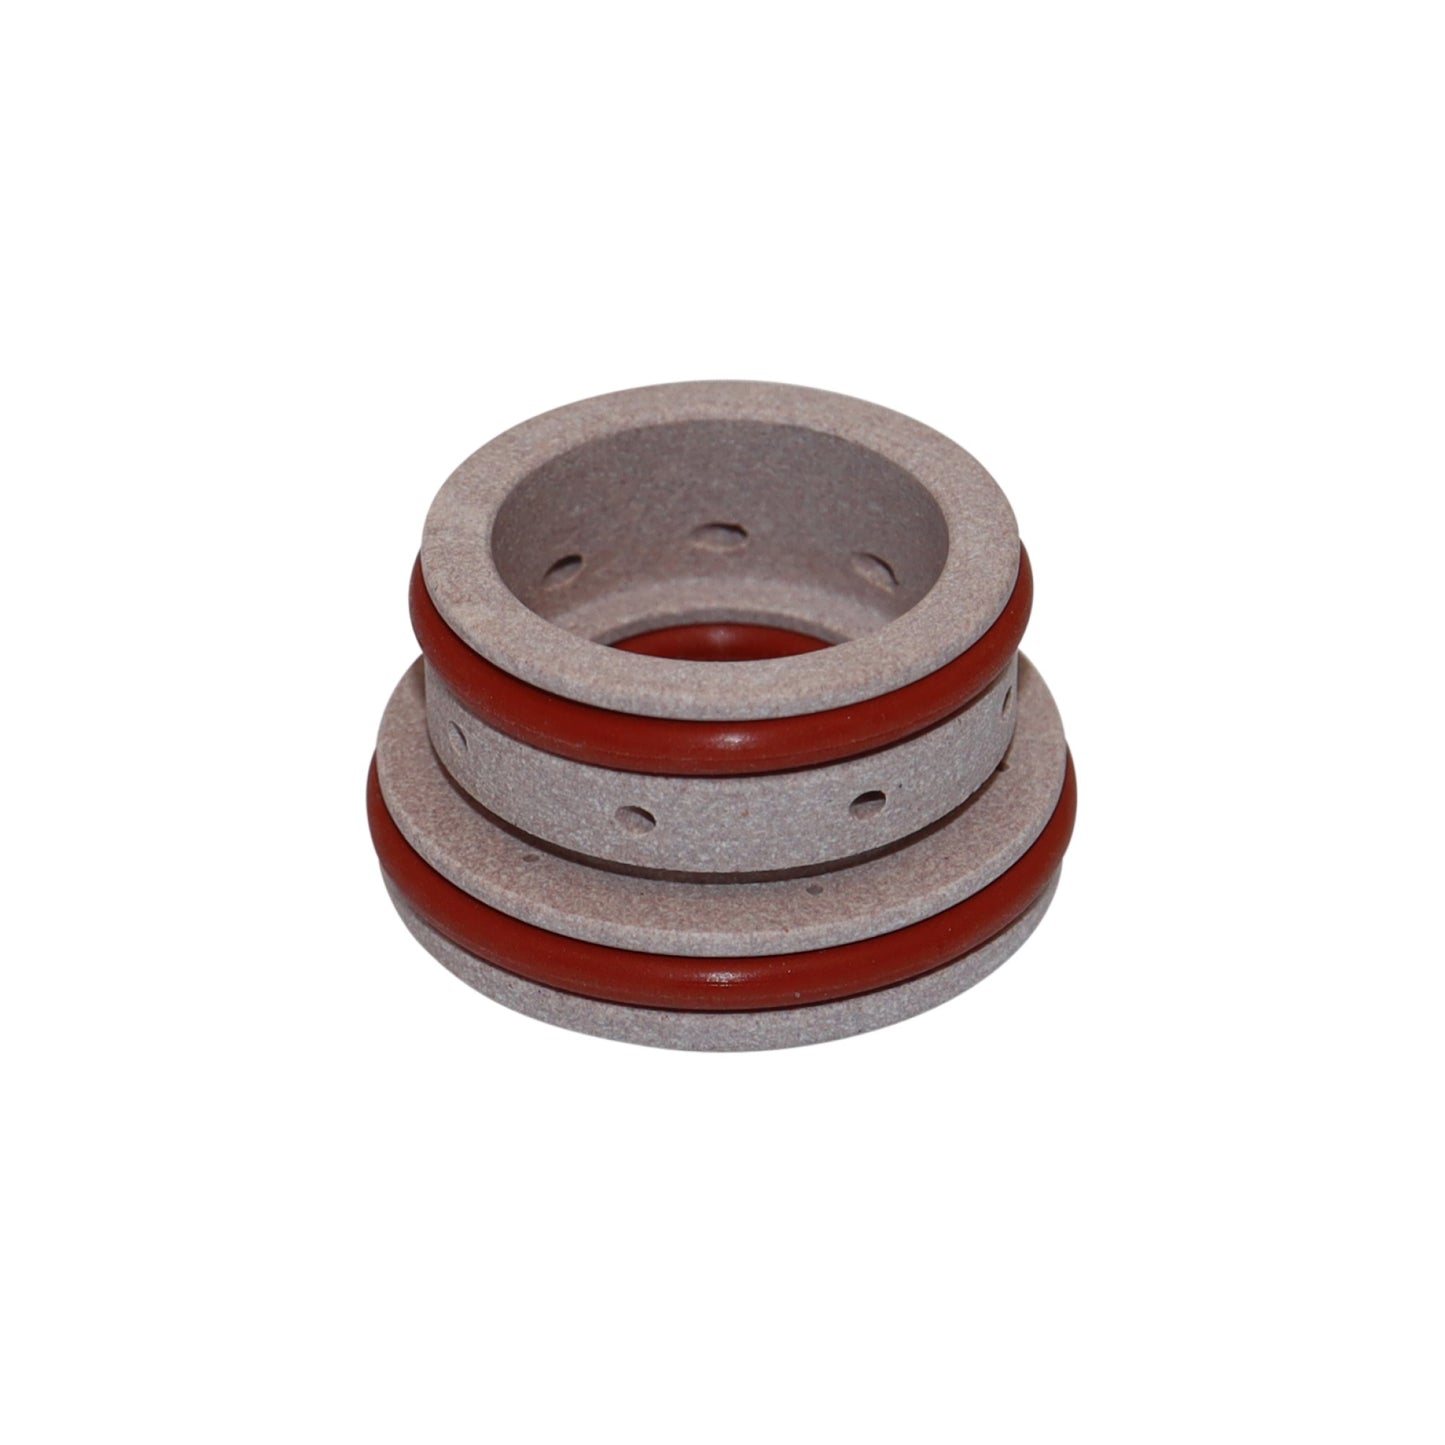 220436 Swirl ring 260 AMPS, O2/AIR, FOR CARBON STEEL (ALTERNATE) THICK METAL PIERCING